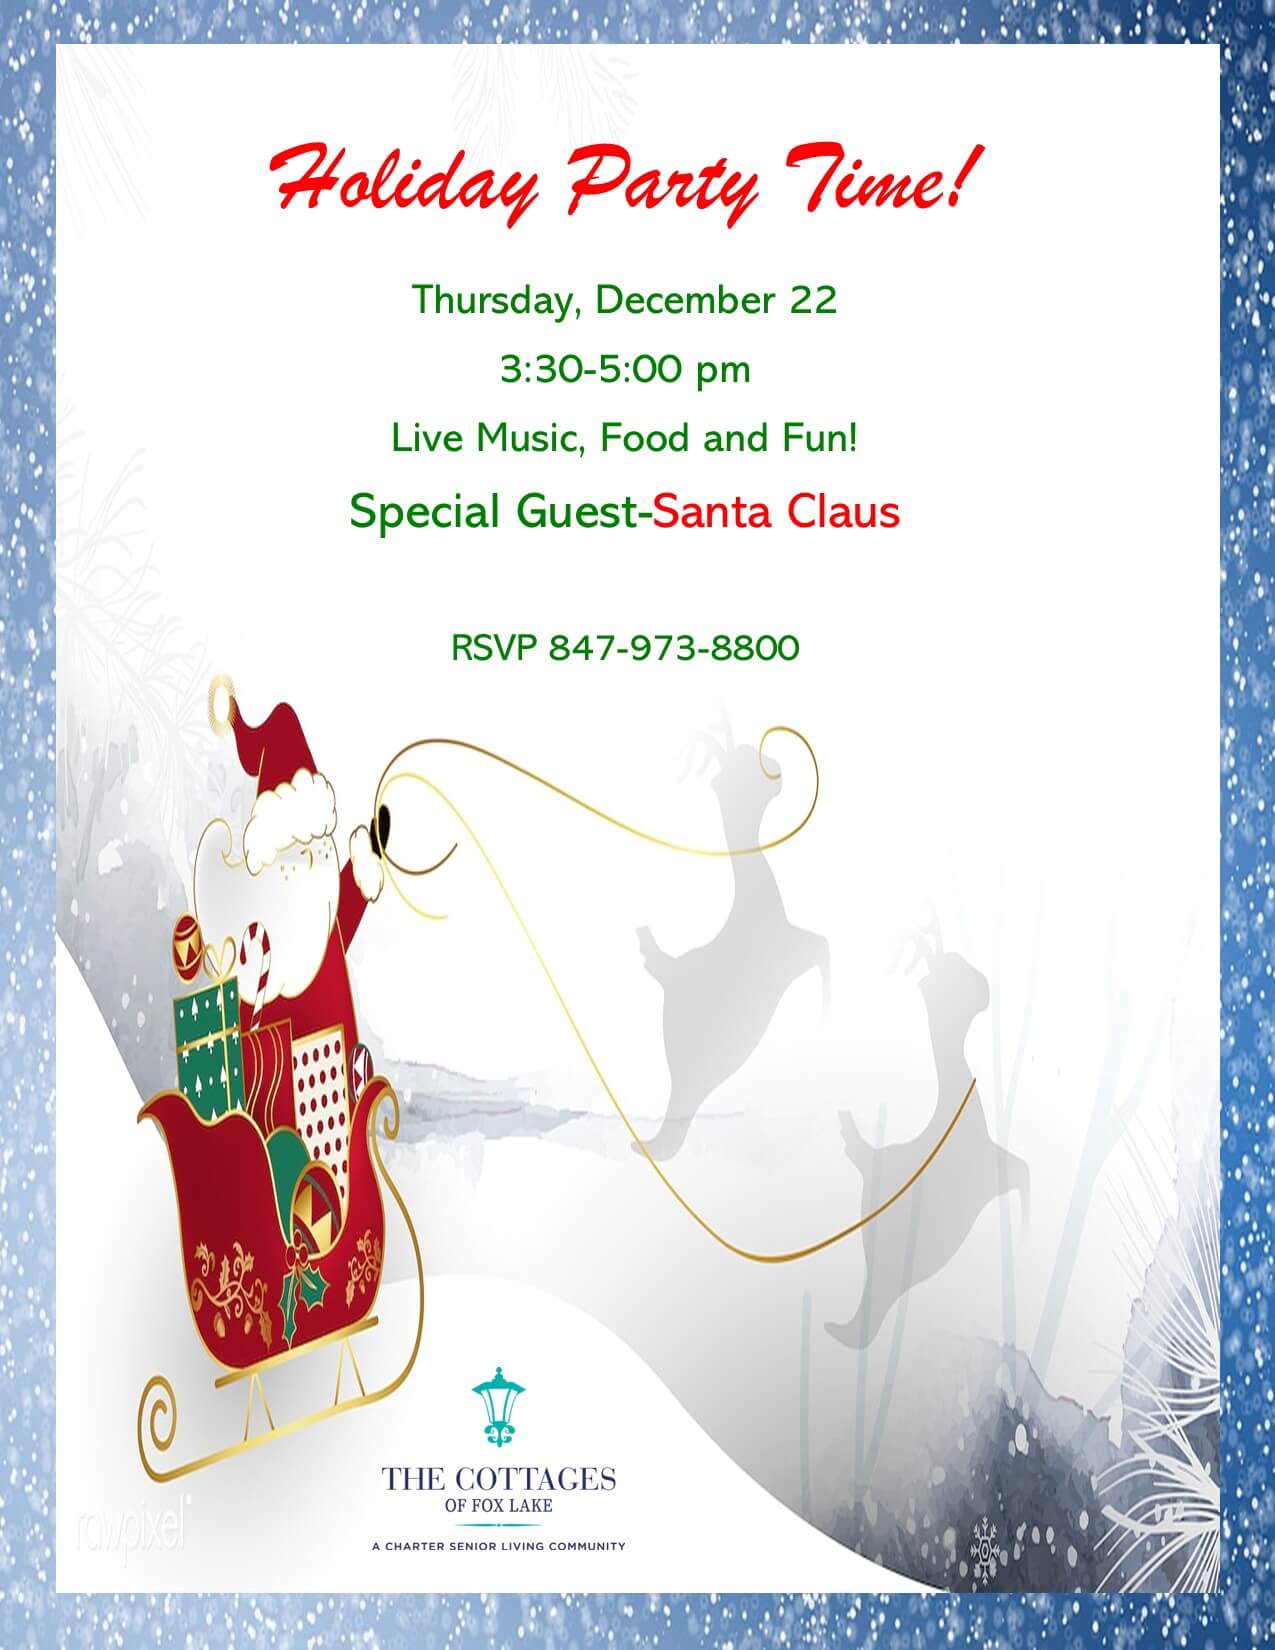 Cottages of Fox Lake - Assisted Living and Memory Care - Holiday Party